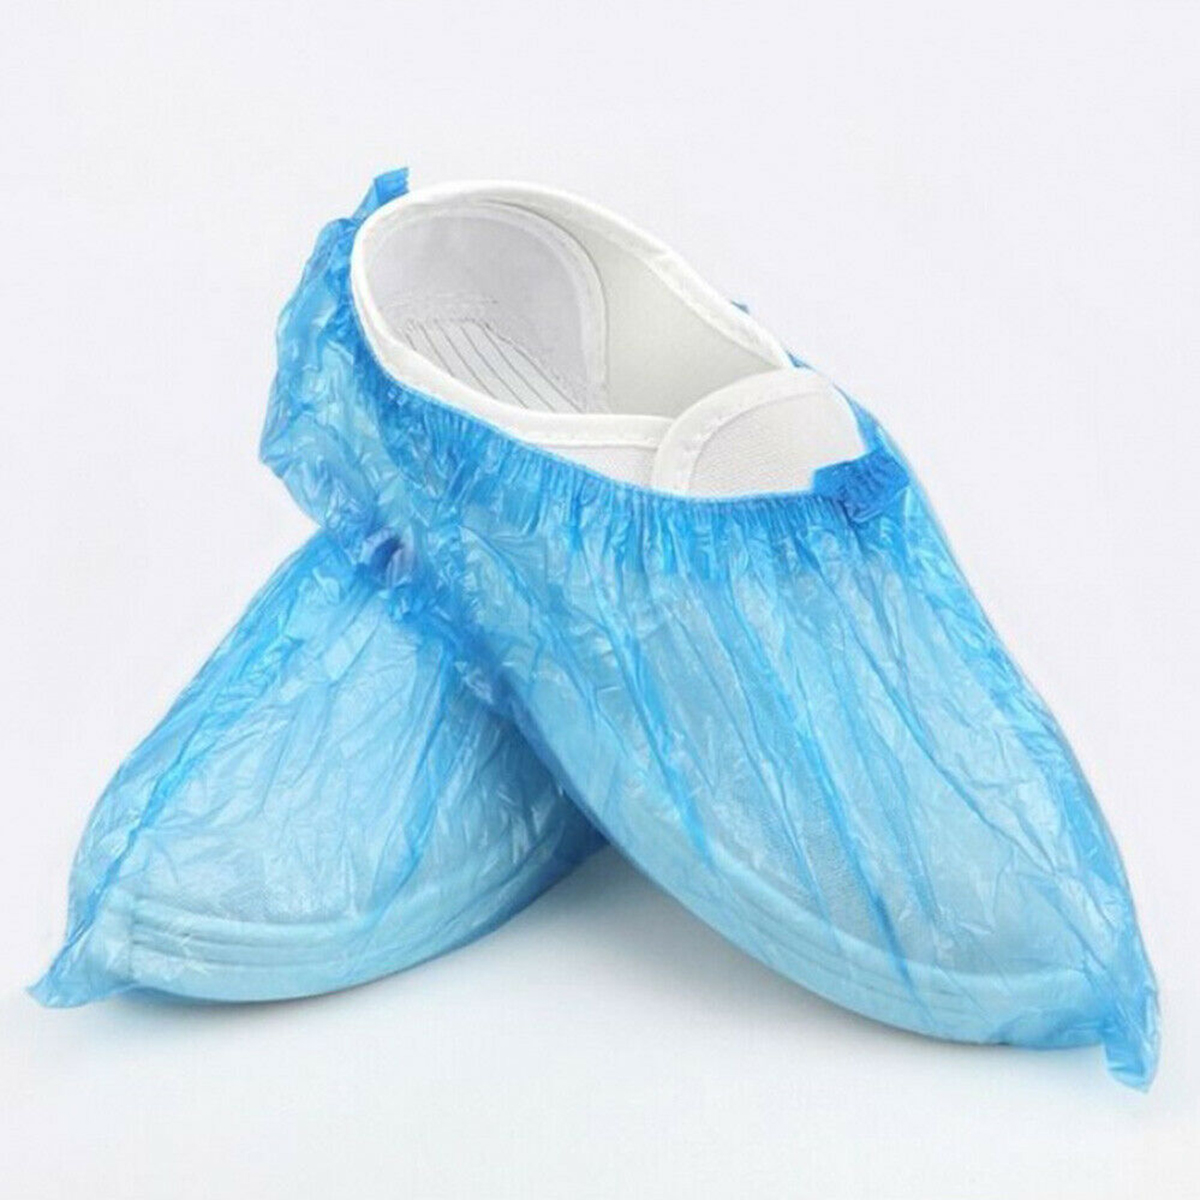 100Pcs Disposable Plastic Anti Slip Shoe Covers Cleaning Overshoes ...